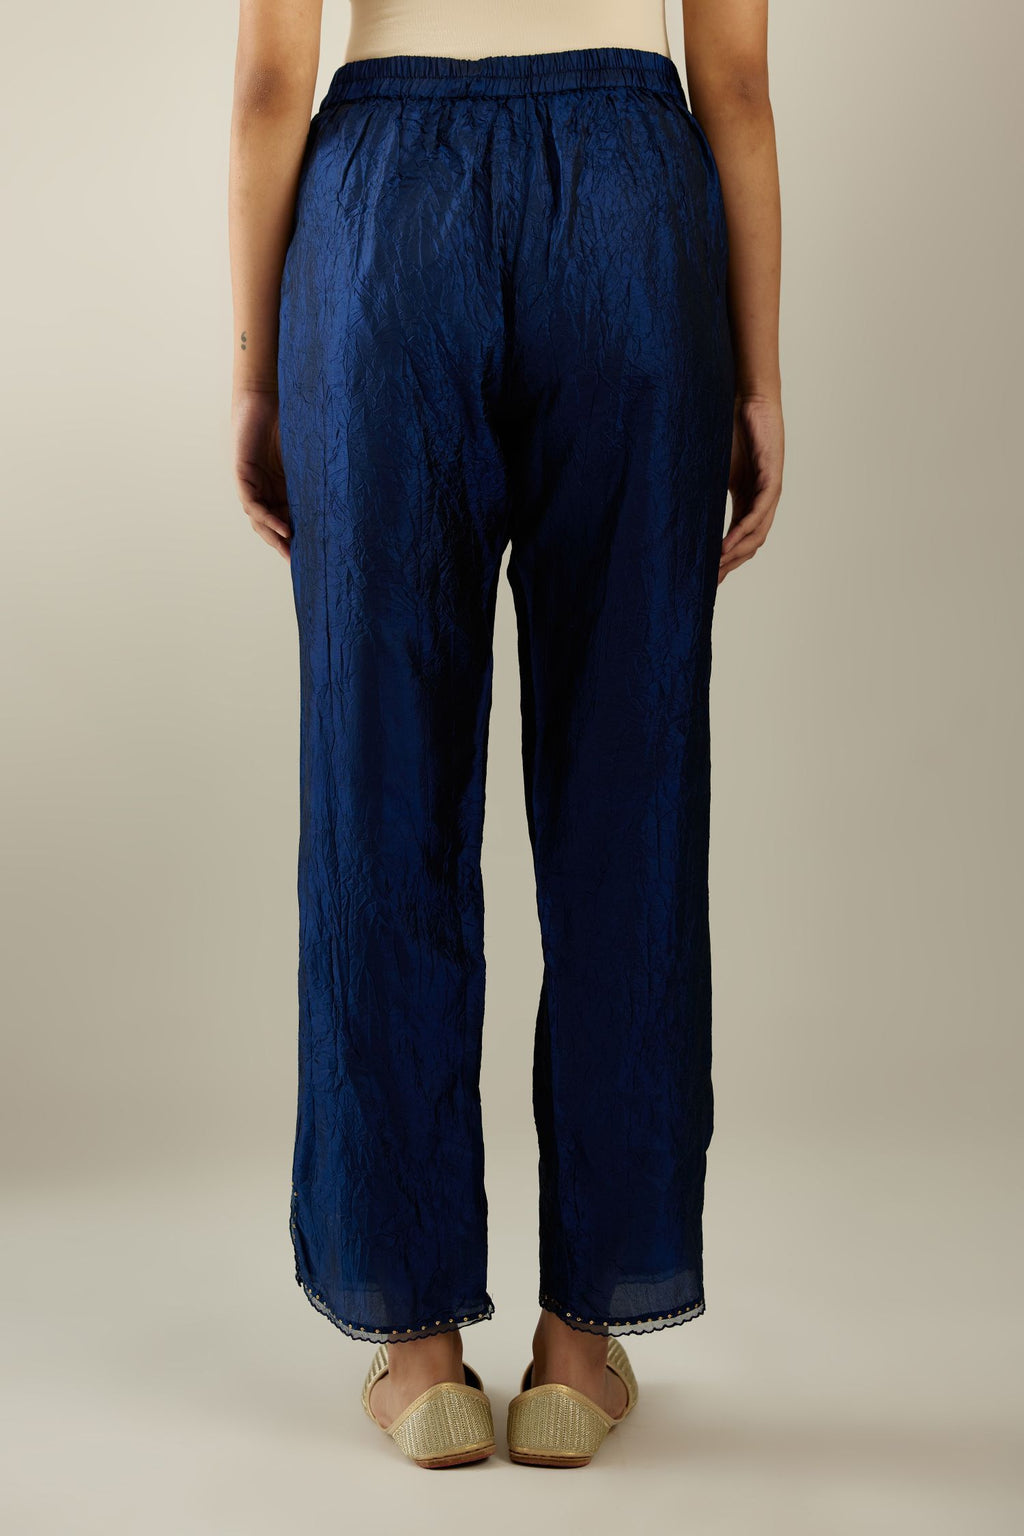 Navy blue hand crushed silk straight pants with scalloped and embroidered organza at edges and detailed with a single line of sequins at hem